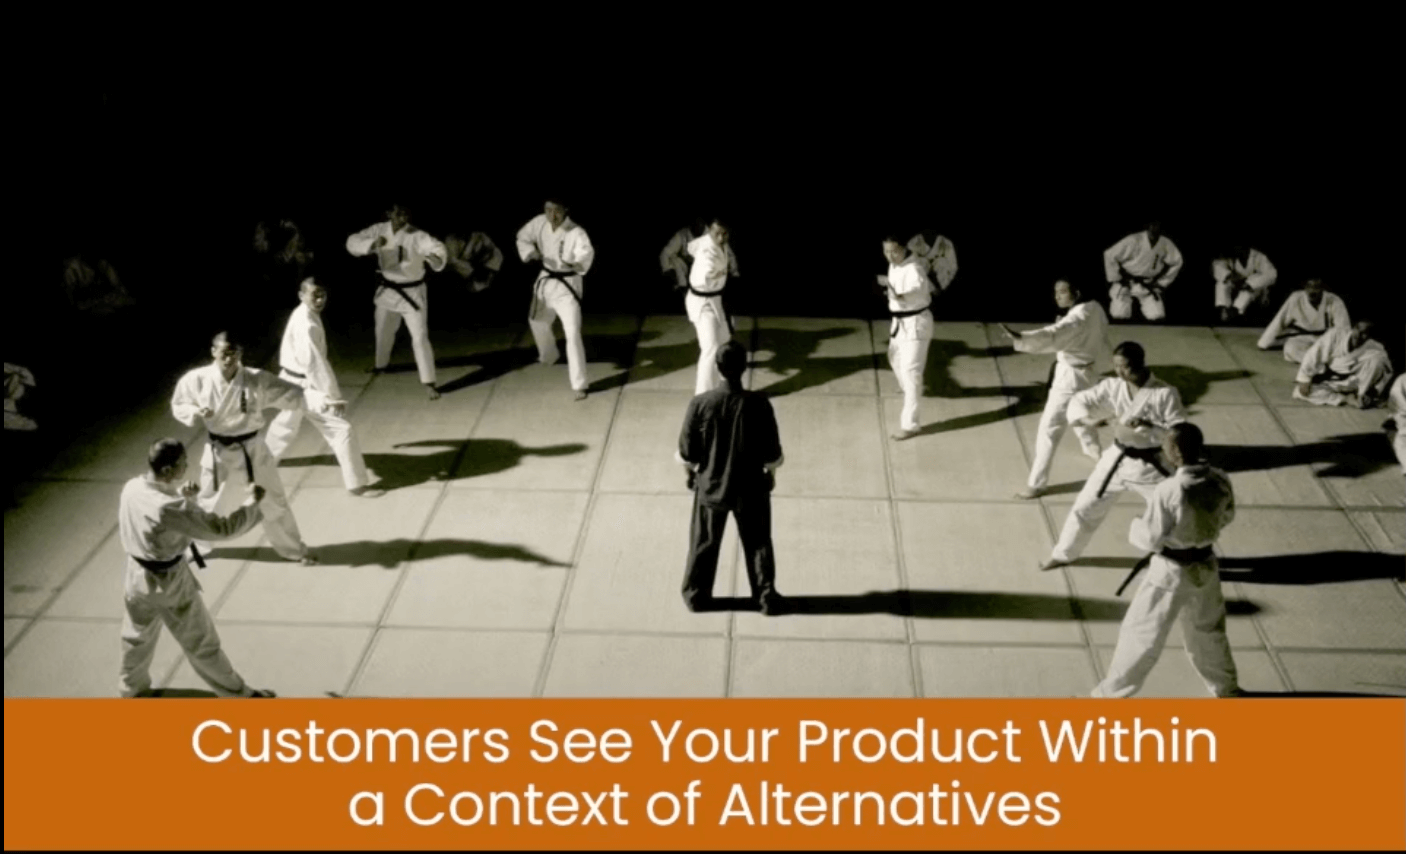 Customers see your product within a context of alternatives